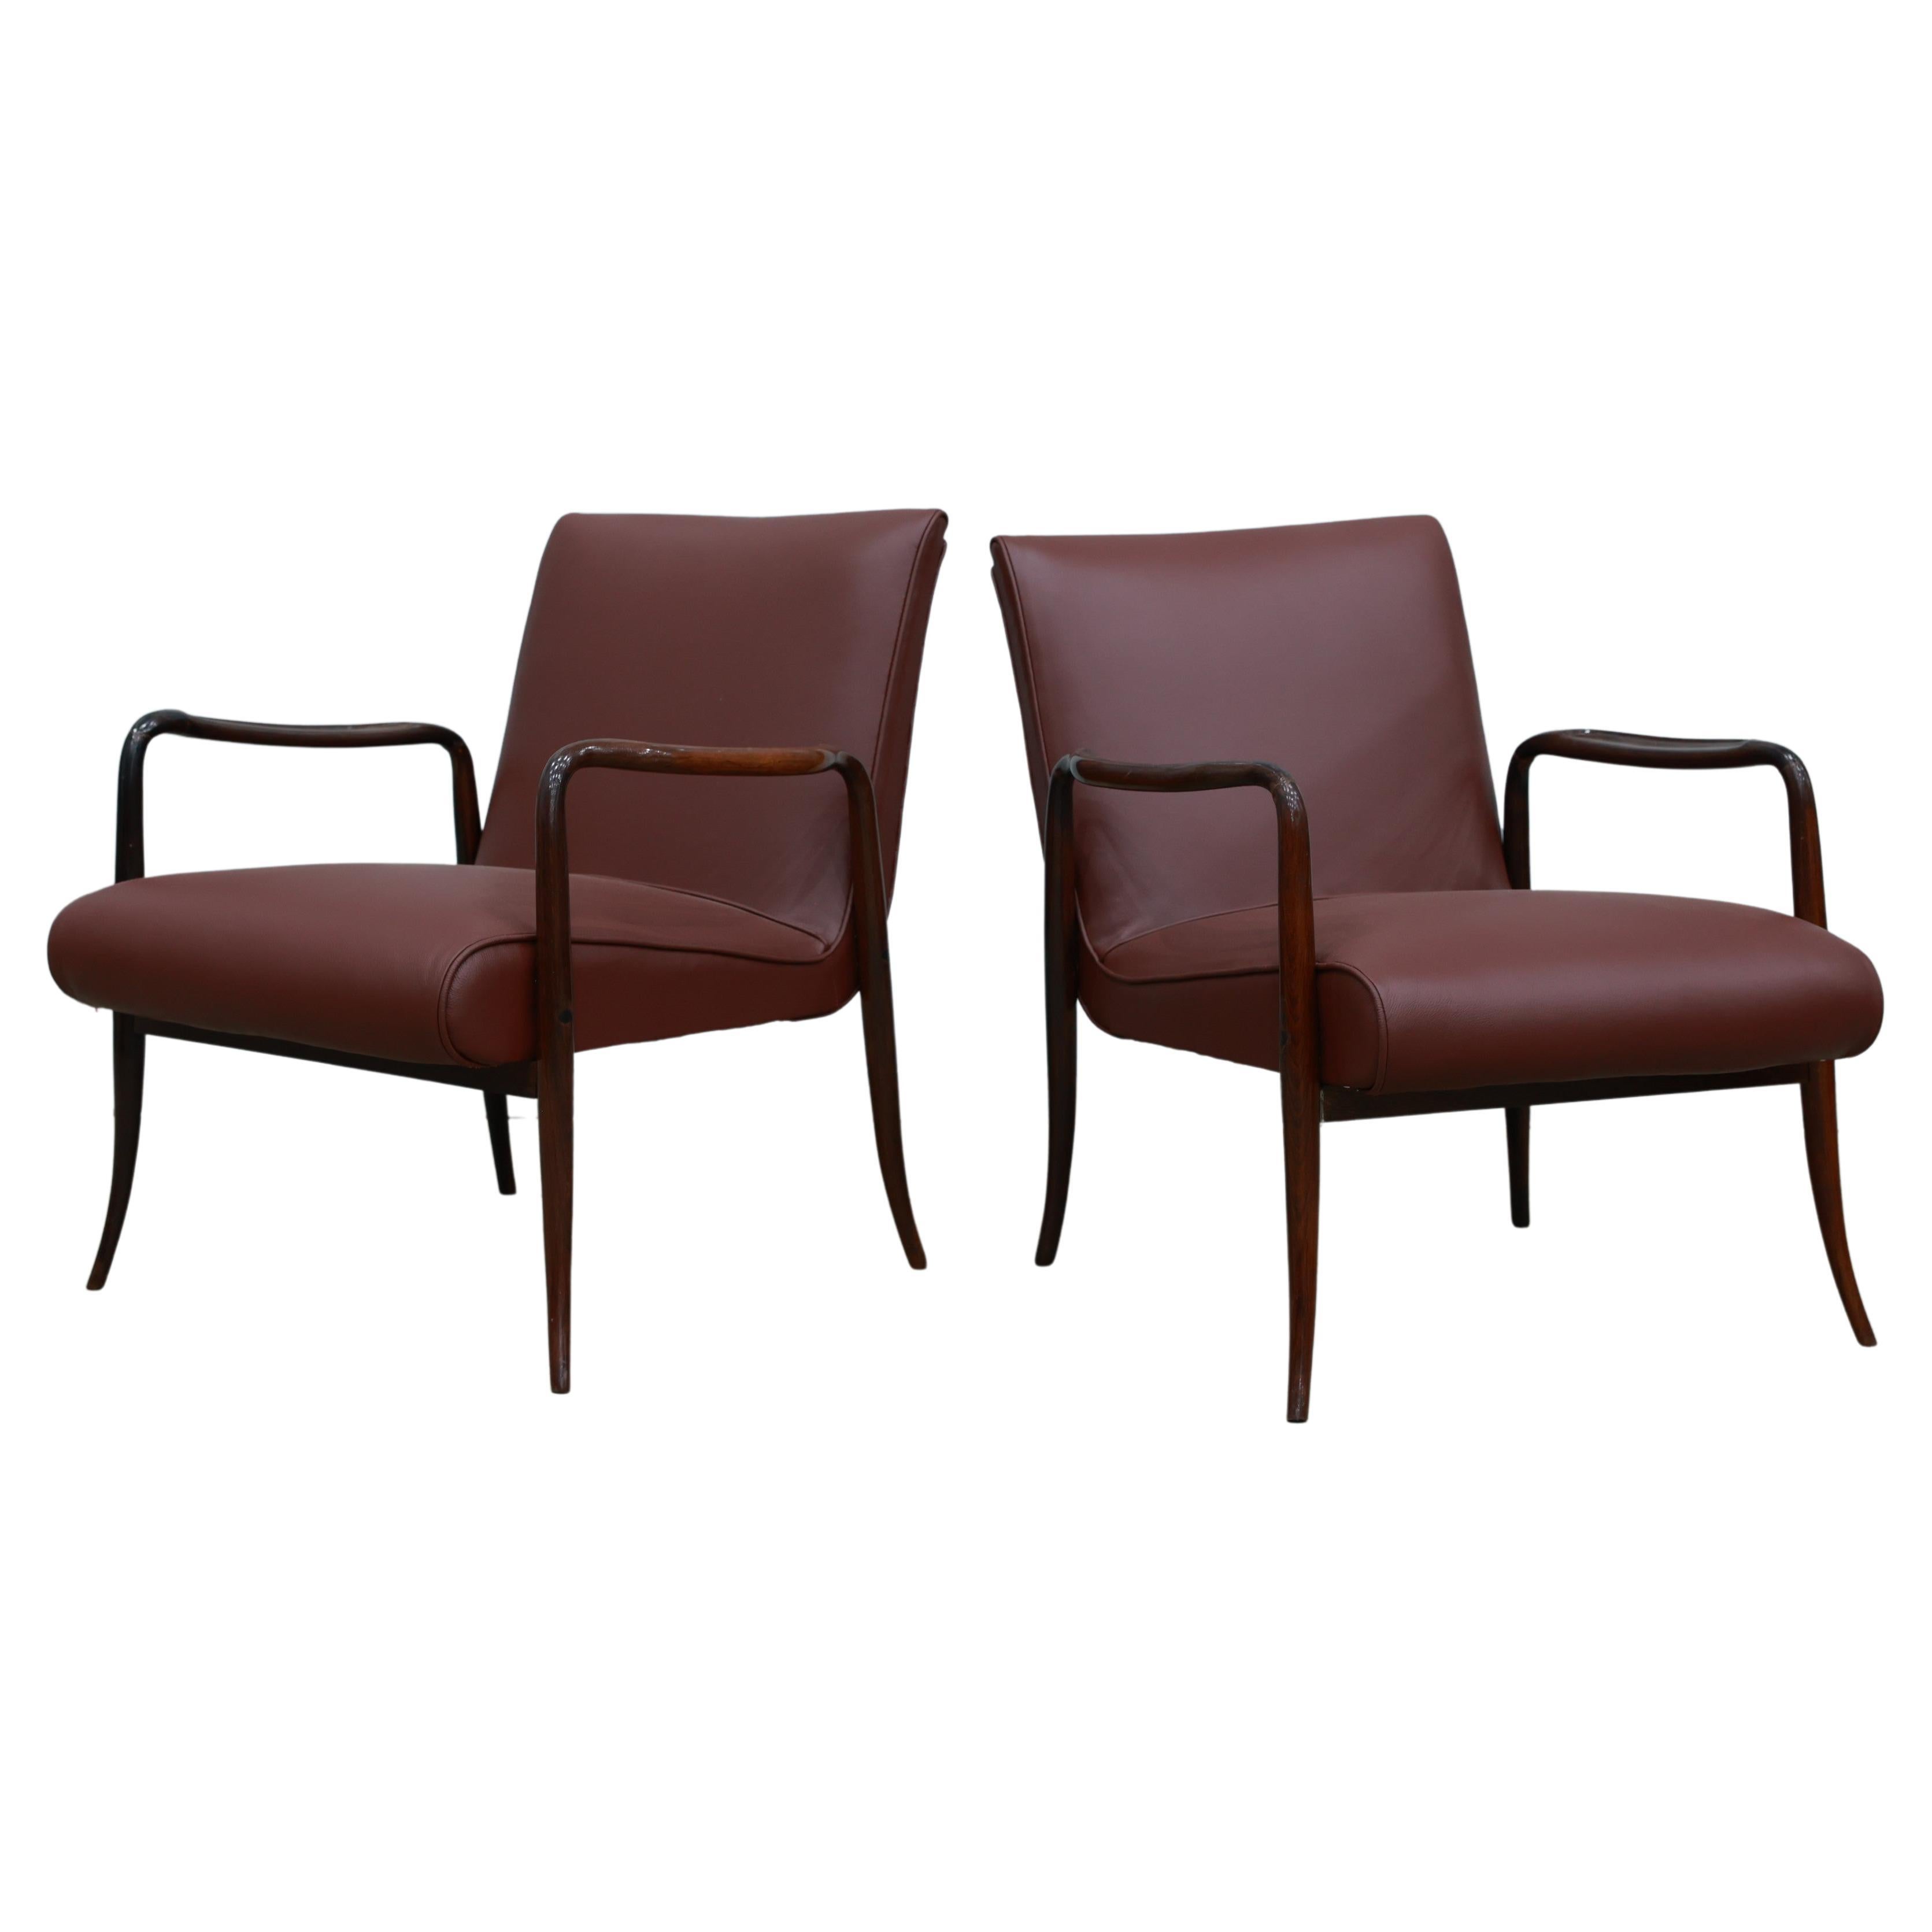 Pair of “Leve” armchairs in hardwood & leather by Joaquim Tenreiro, 1942, Brazil